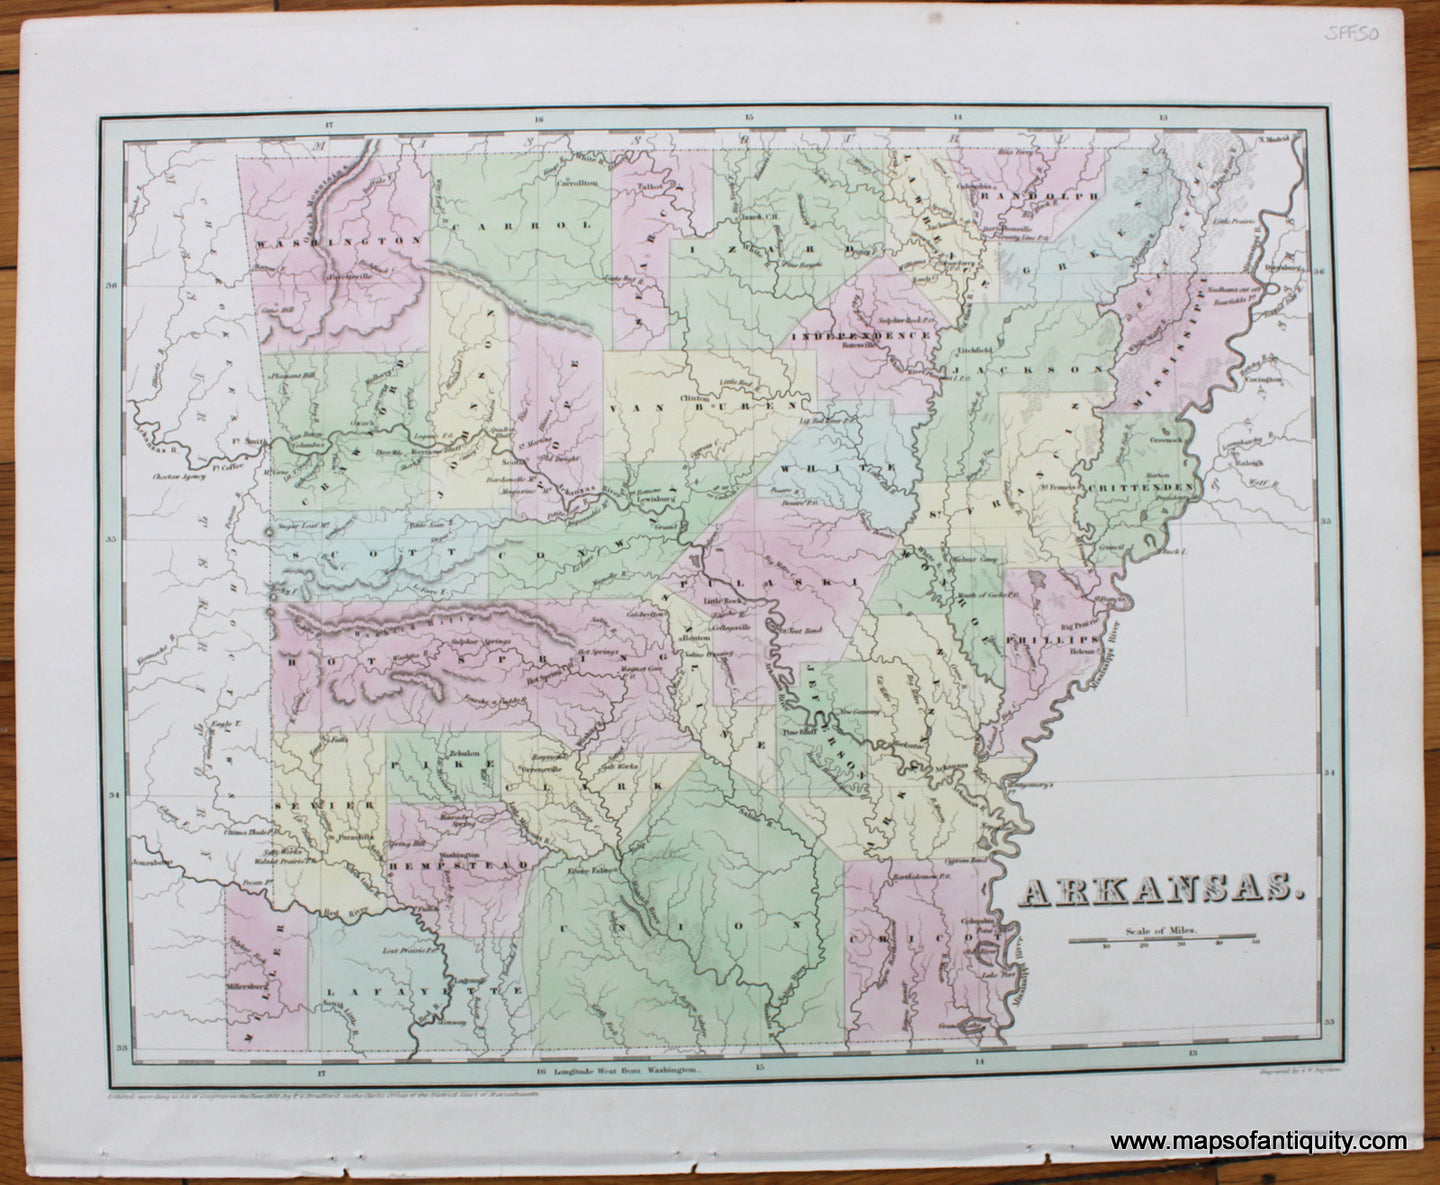 Antique-Hand-Colored-Map-Arkansas.-United-States-South-1838-Bradford-Maps-Of-Antiquity